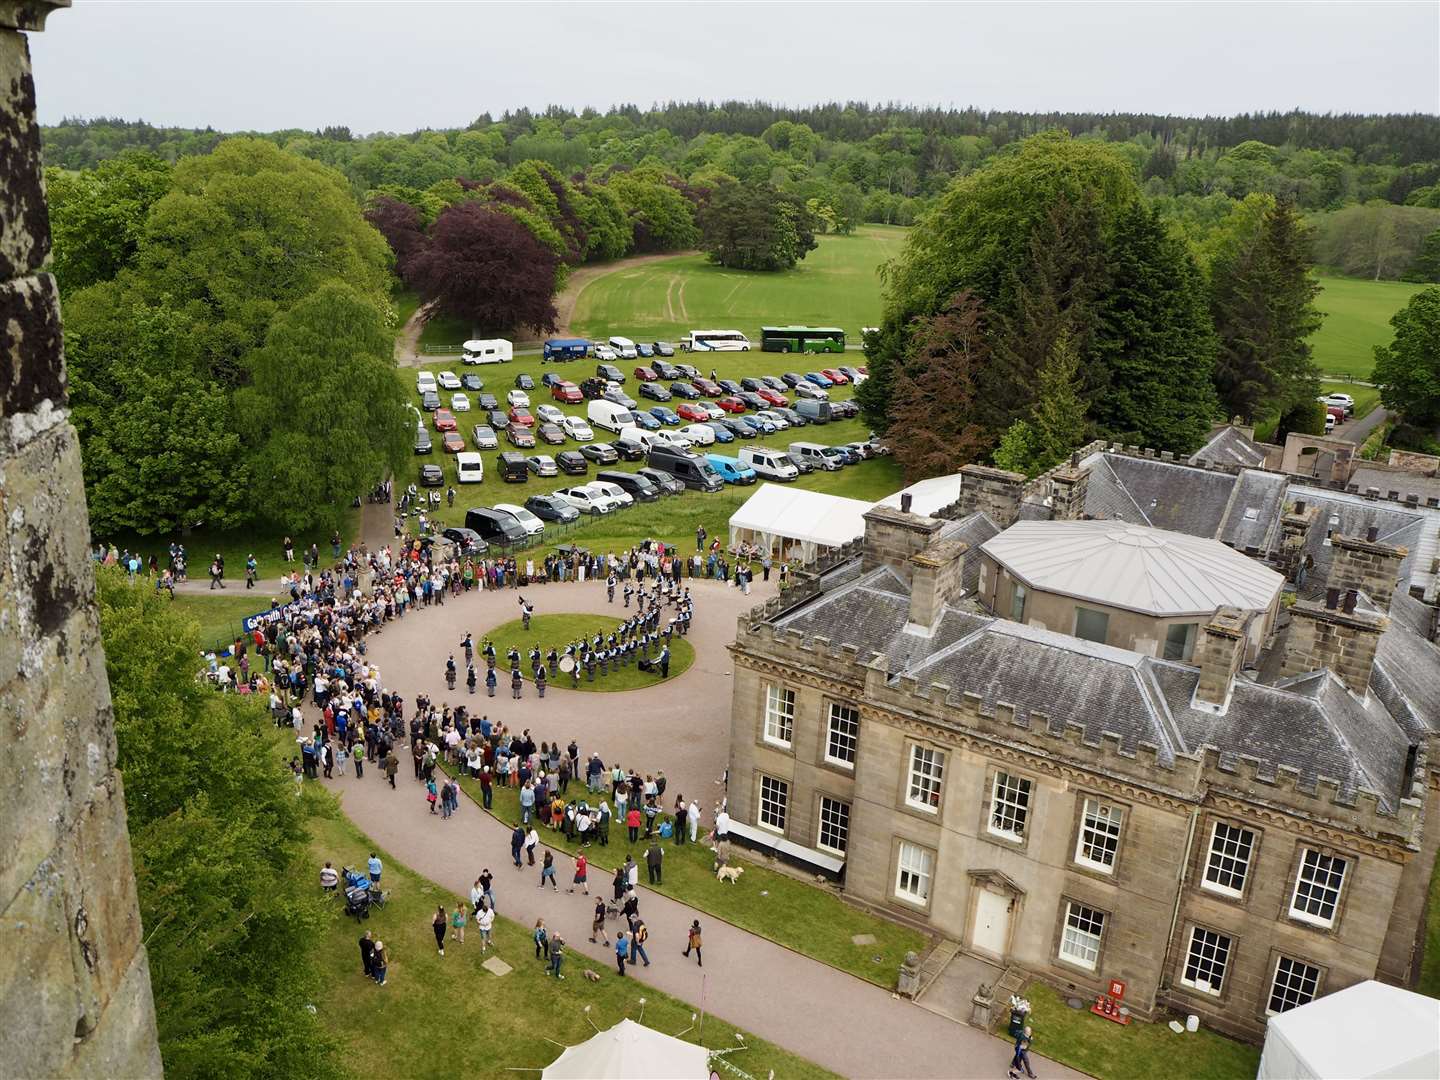 The games will once more take part in the grounds of Gordon Castle.